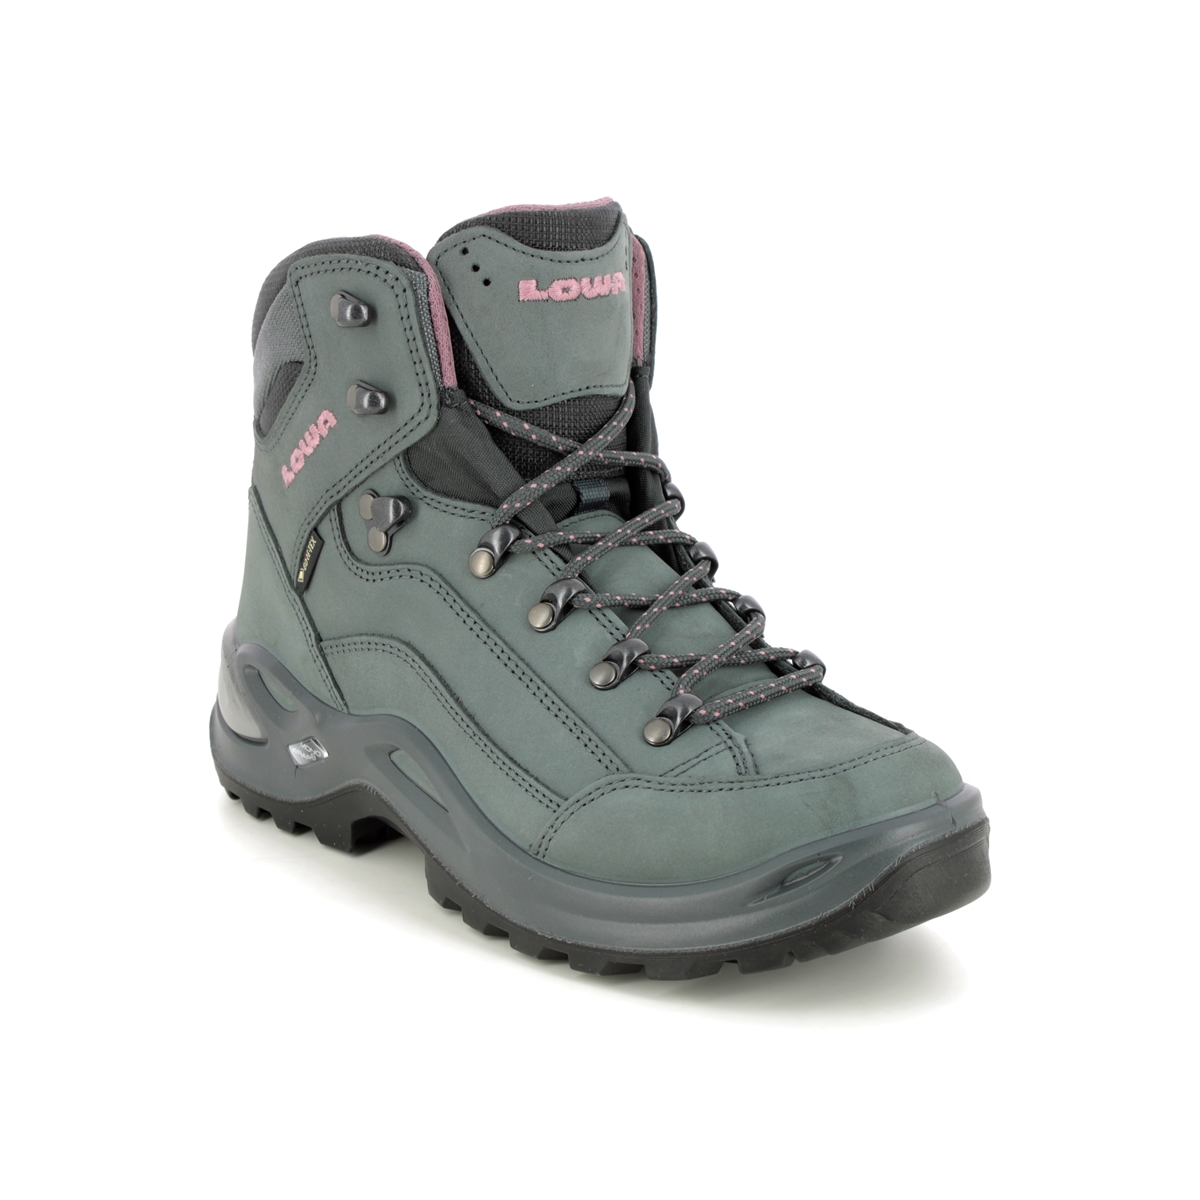 Lowa Renegade Gtx W Womens Walking Boots In Charcoal 320945-9789 In Regular Fit Ladies Uk Size 5.5 In Plain Charcoal